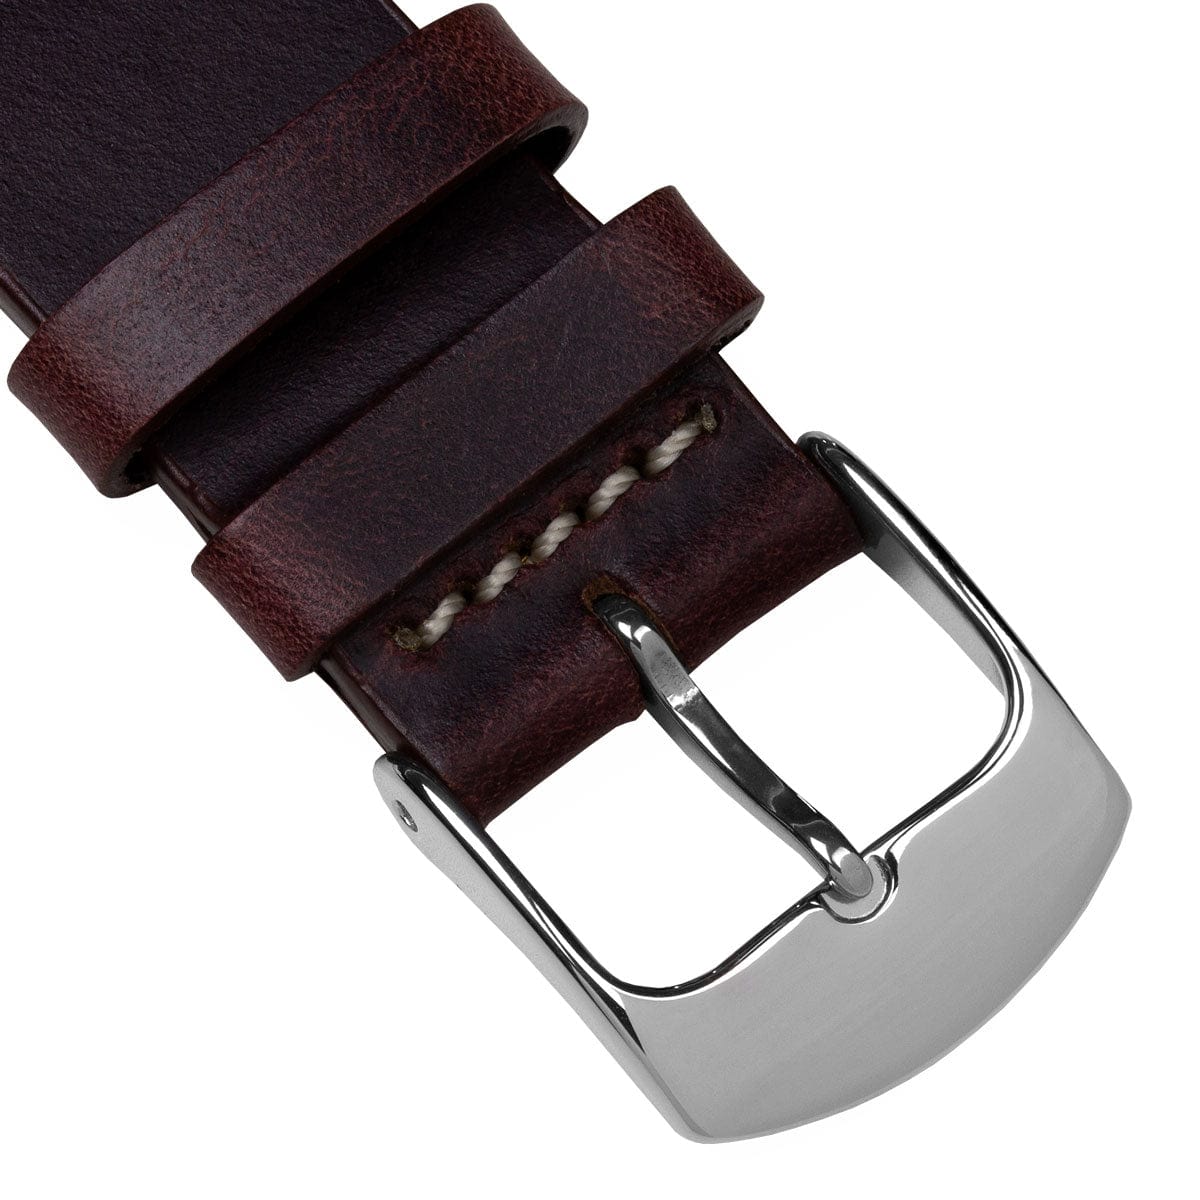 Clanville Vintage Horween Chromexcel Leather Dress Watch Strap - Conker Brown